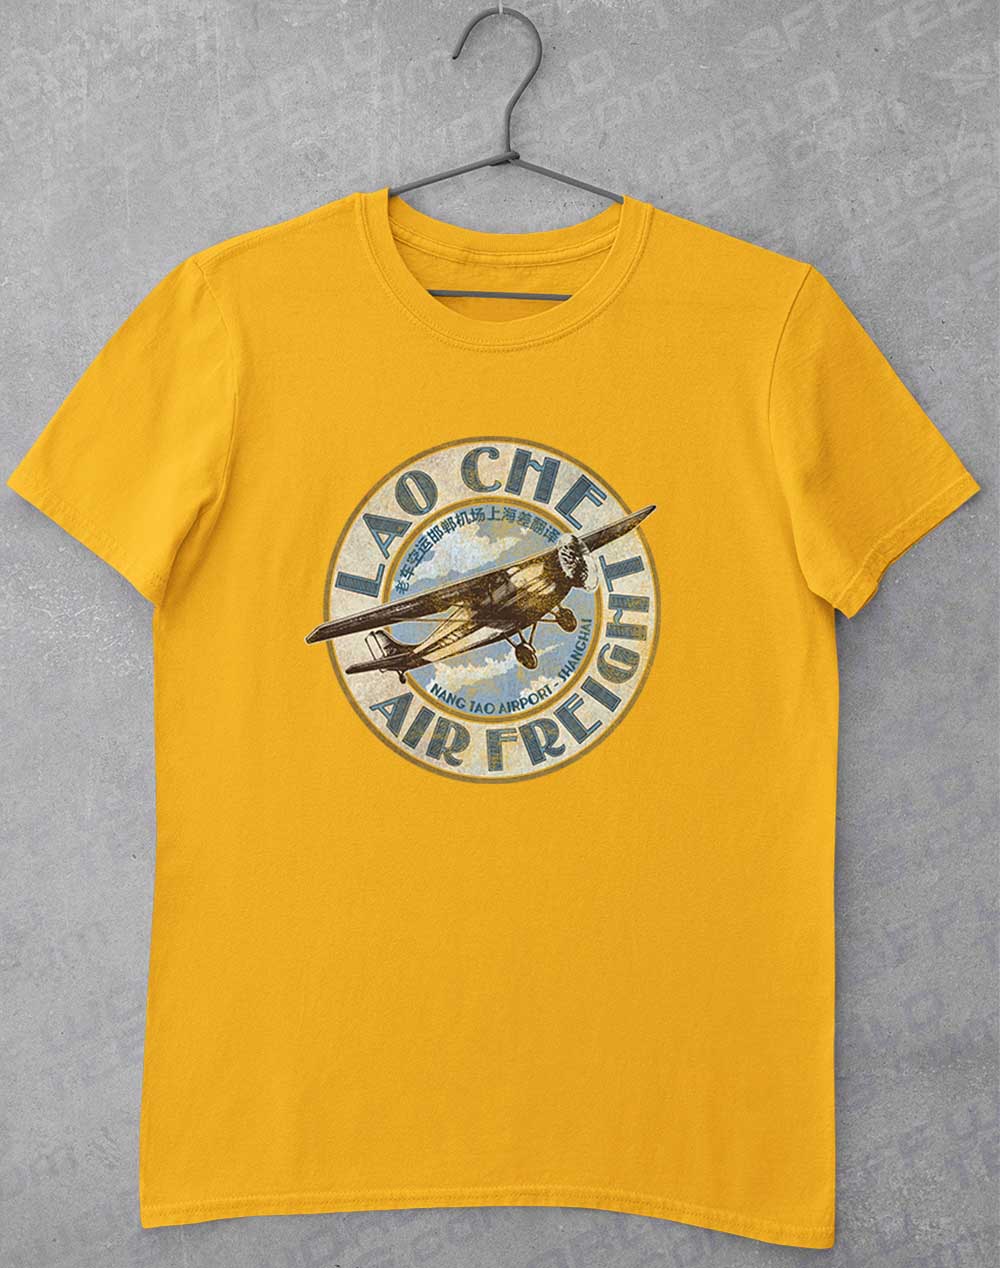 Gold - Lao Che Air Freight T-Shirt